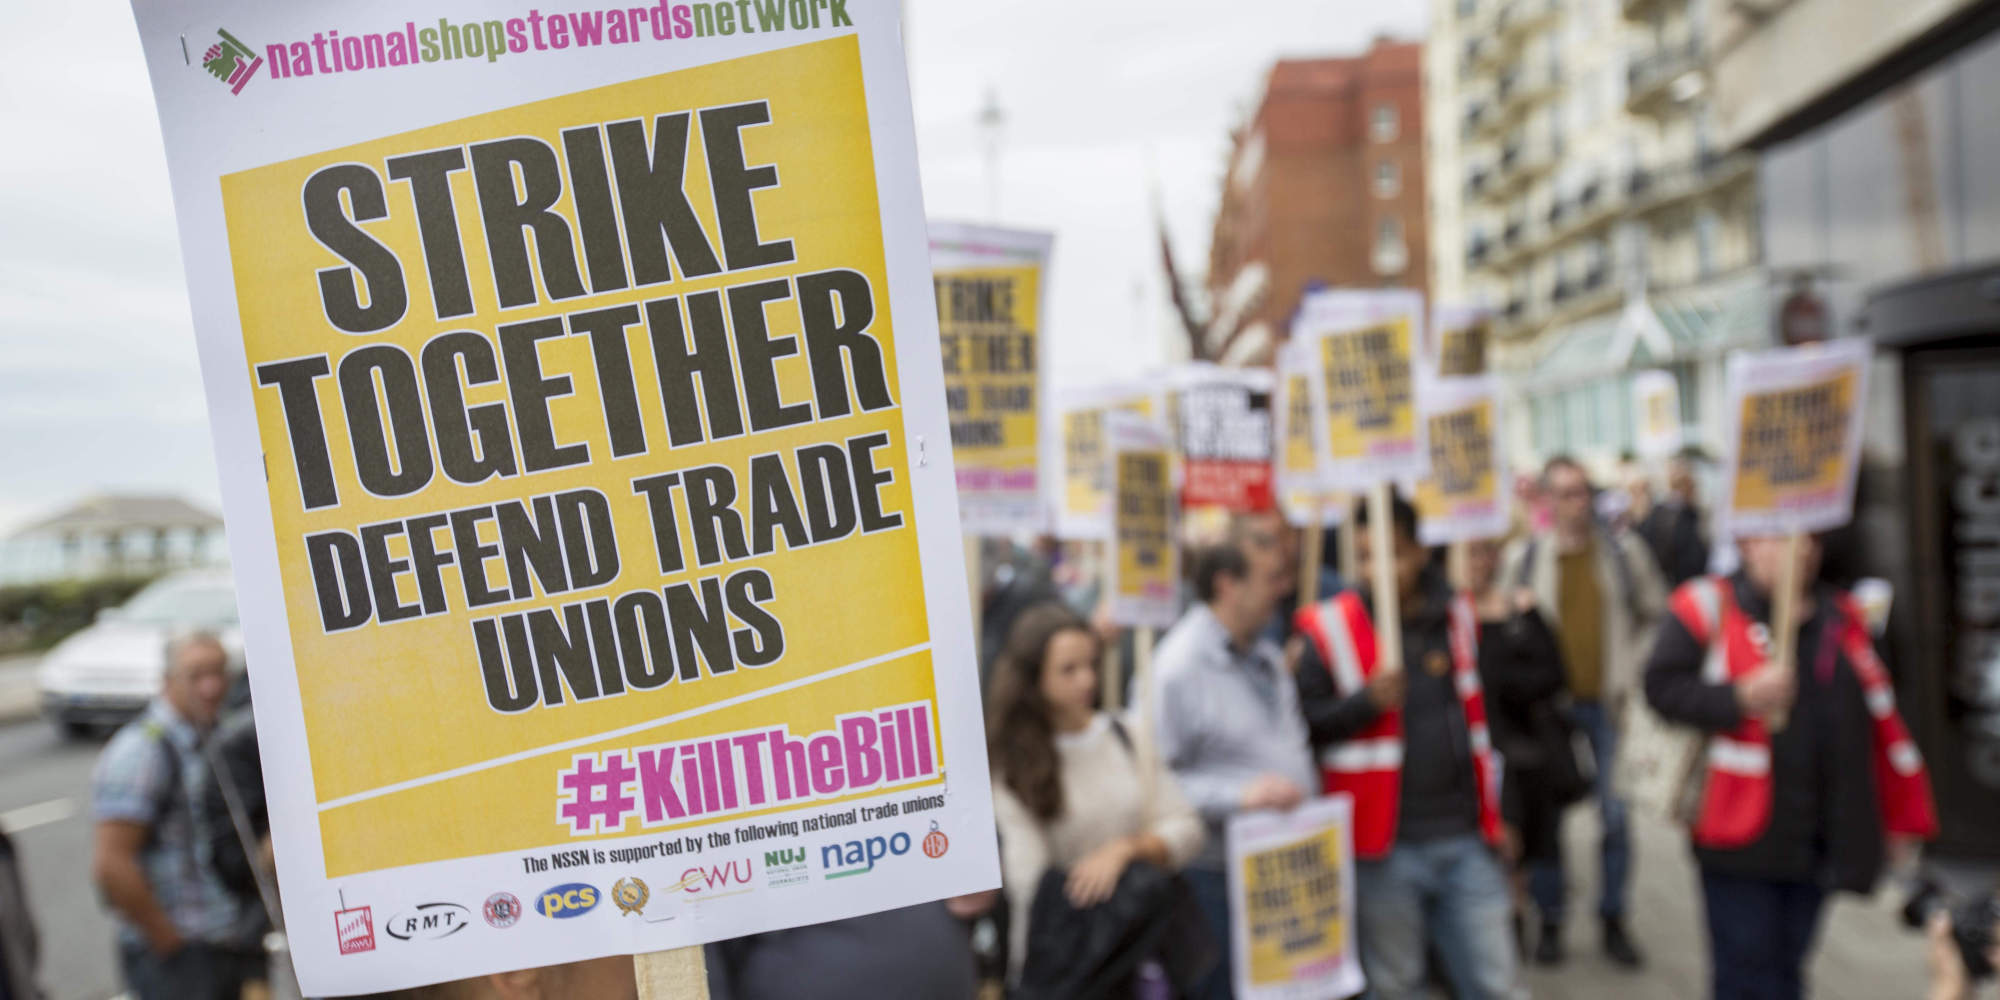 What are Trade Unions